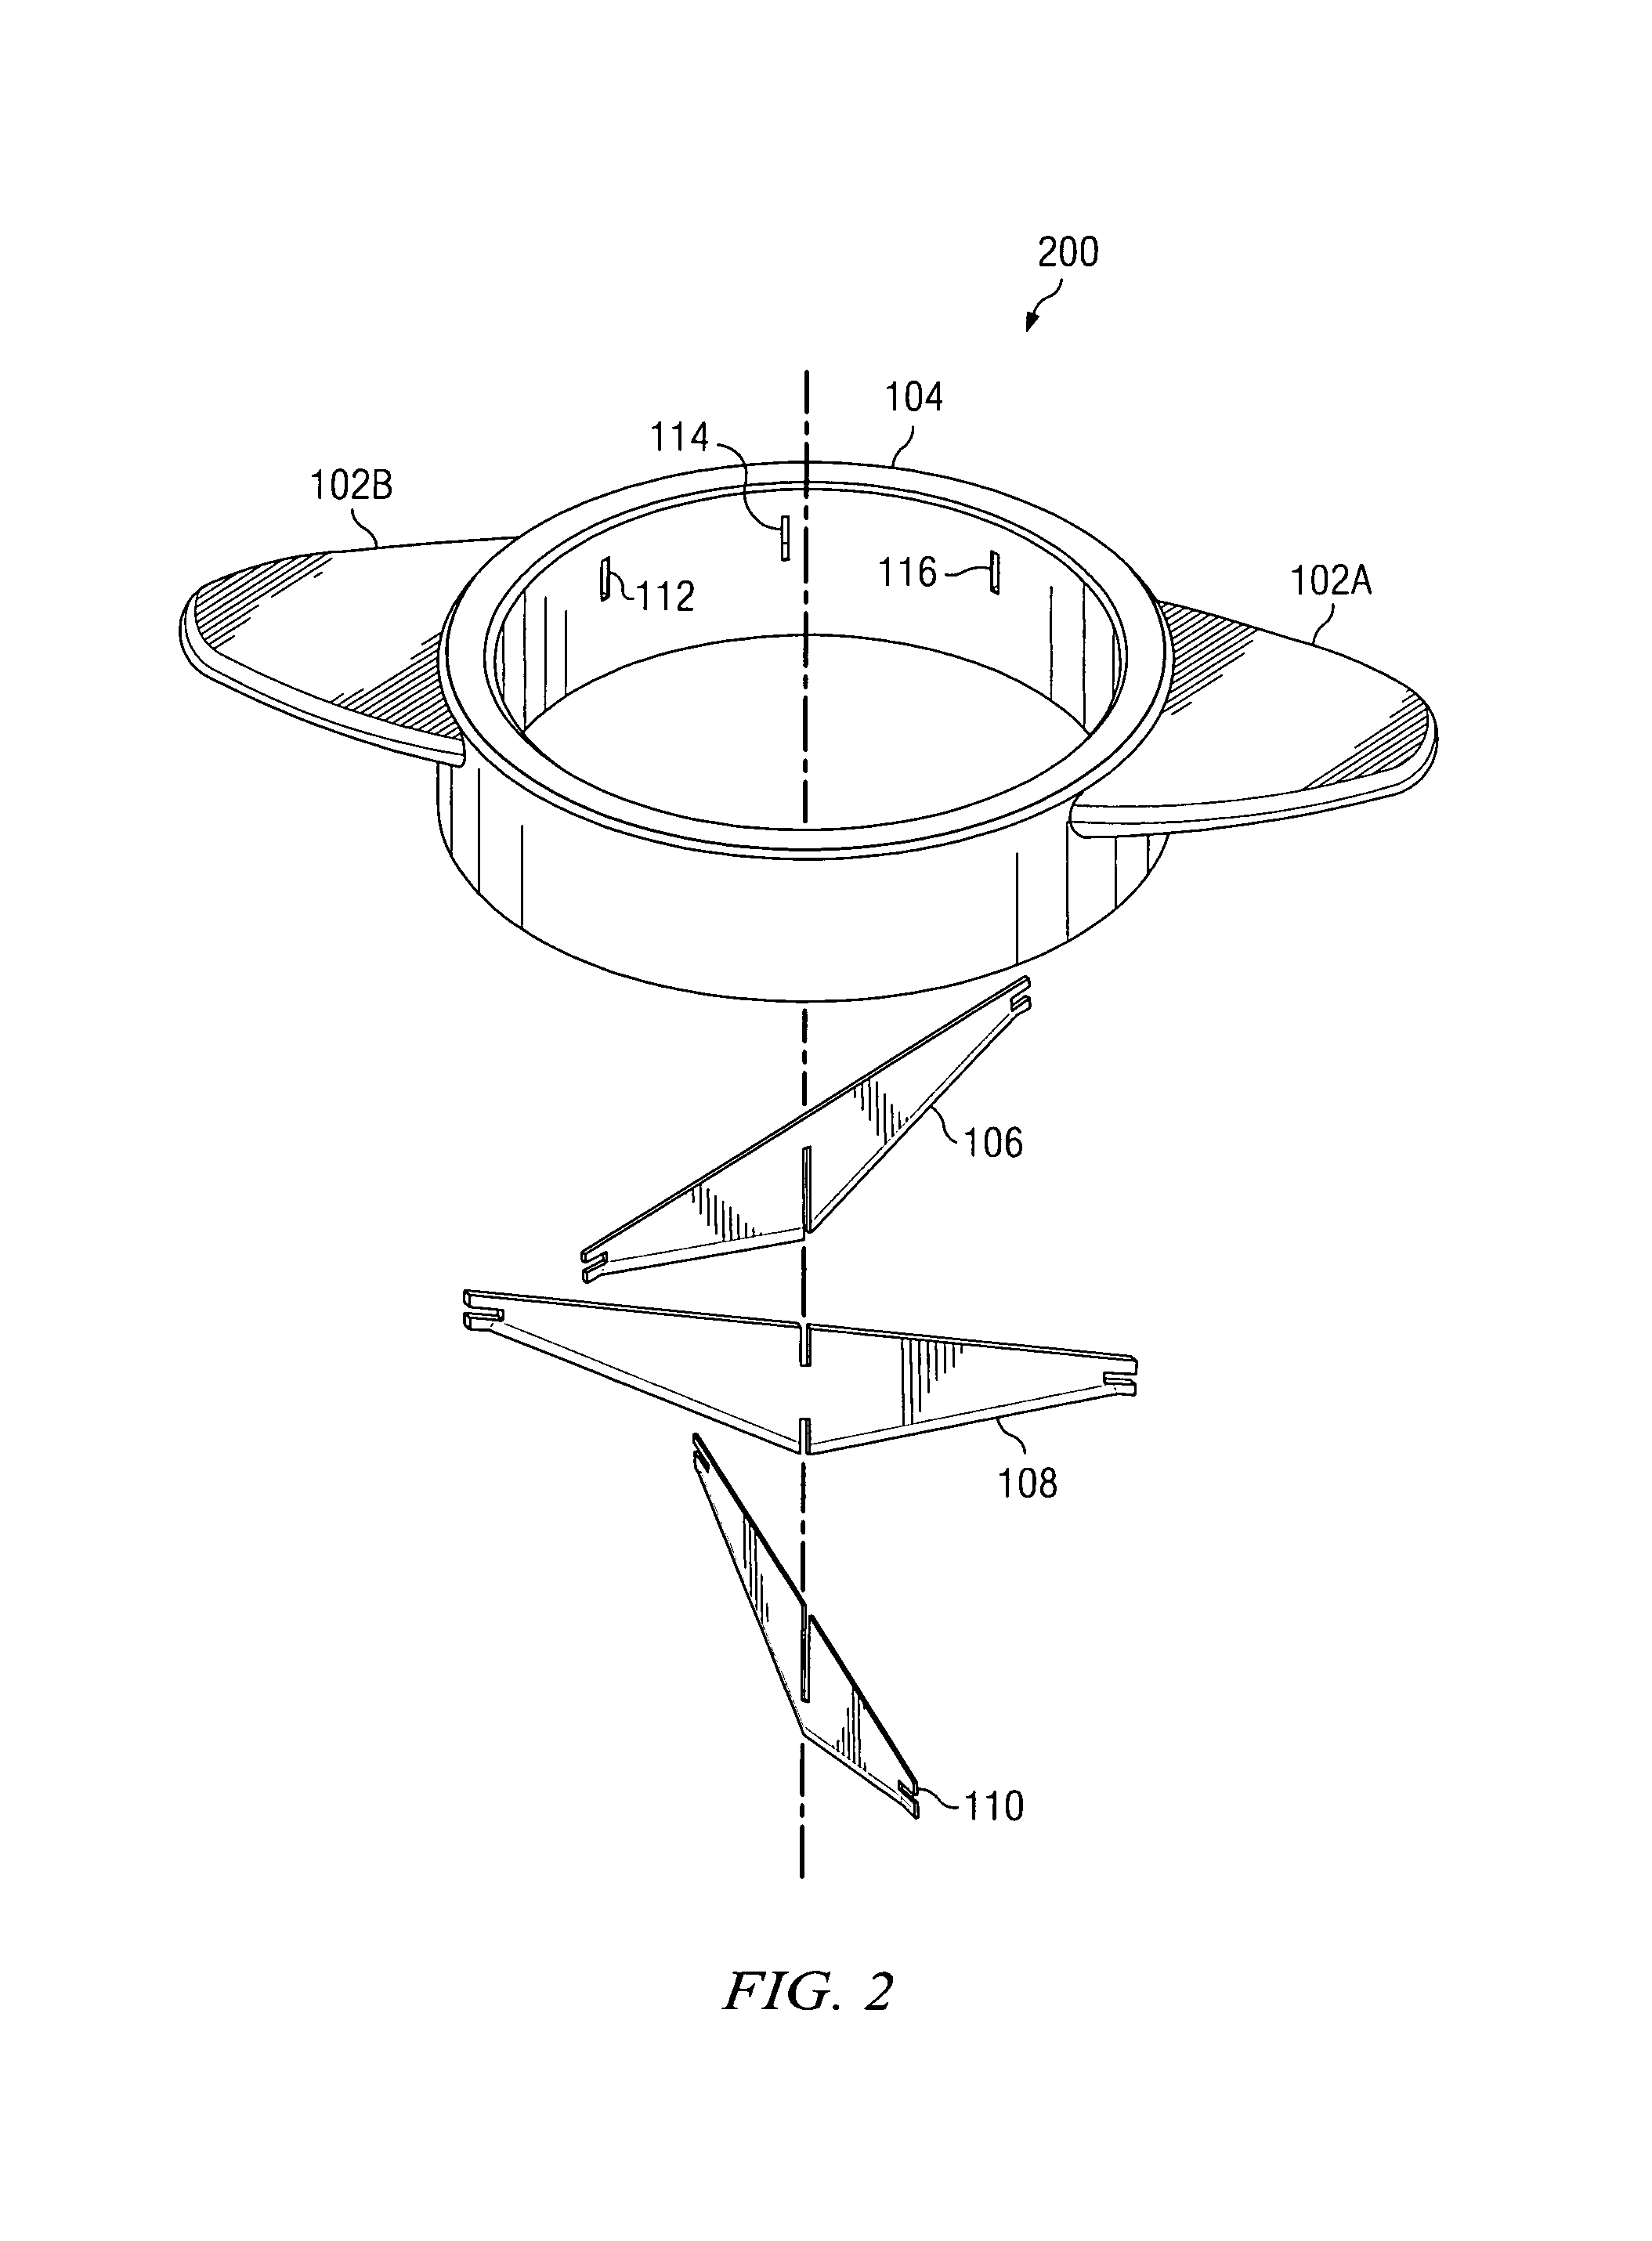 Apparatus for slicing fruit and other items